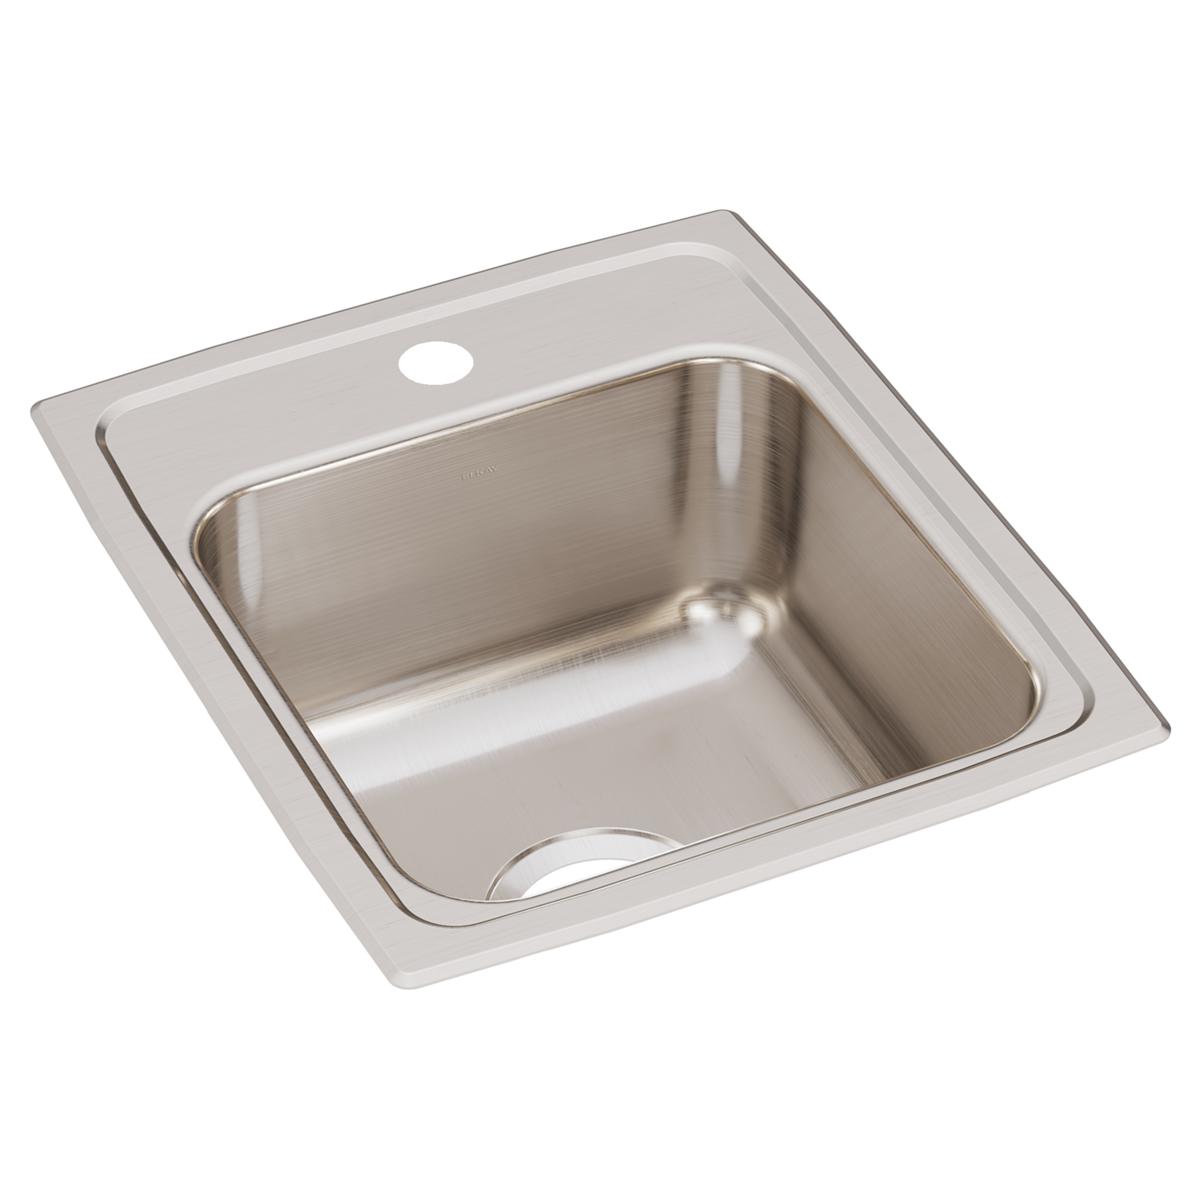 Elkay Lustertone Classic 15" x 17-1/2" x 7-5/8" Single Bowl Drop-in Bar Sink with Quick-clip